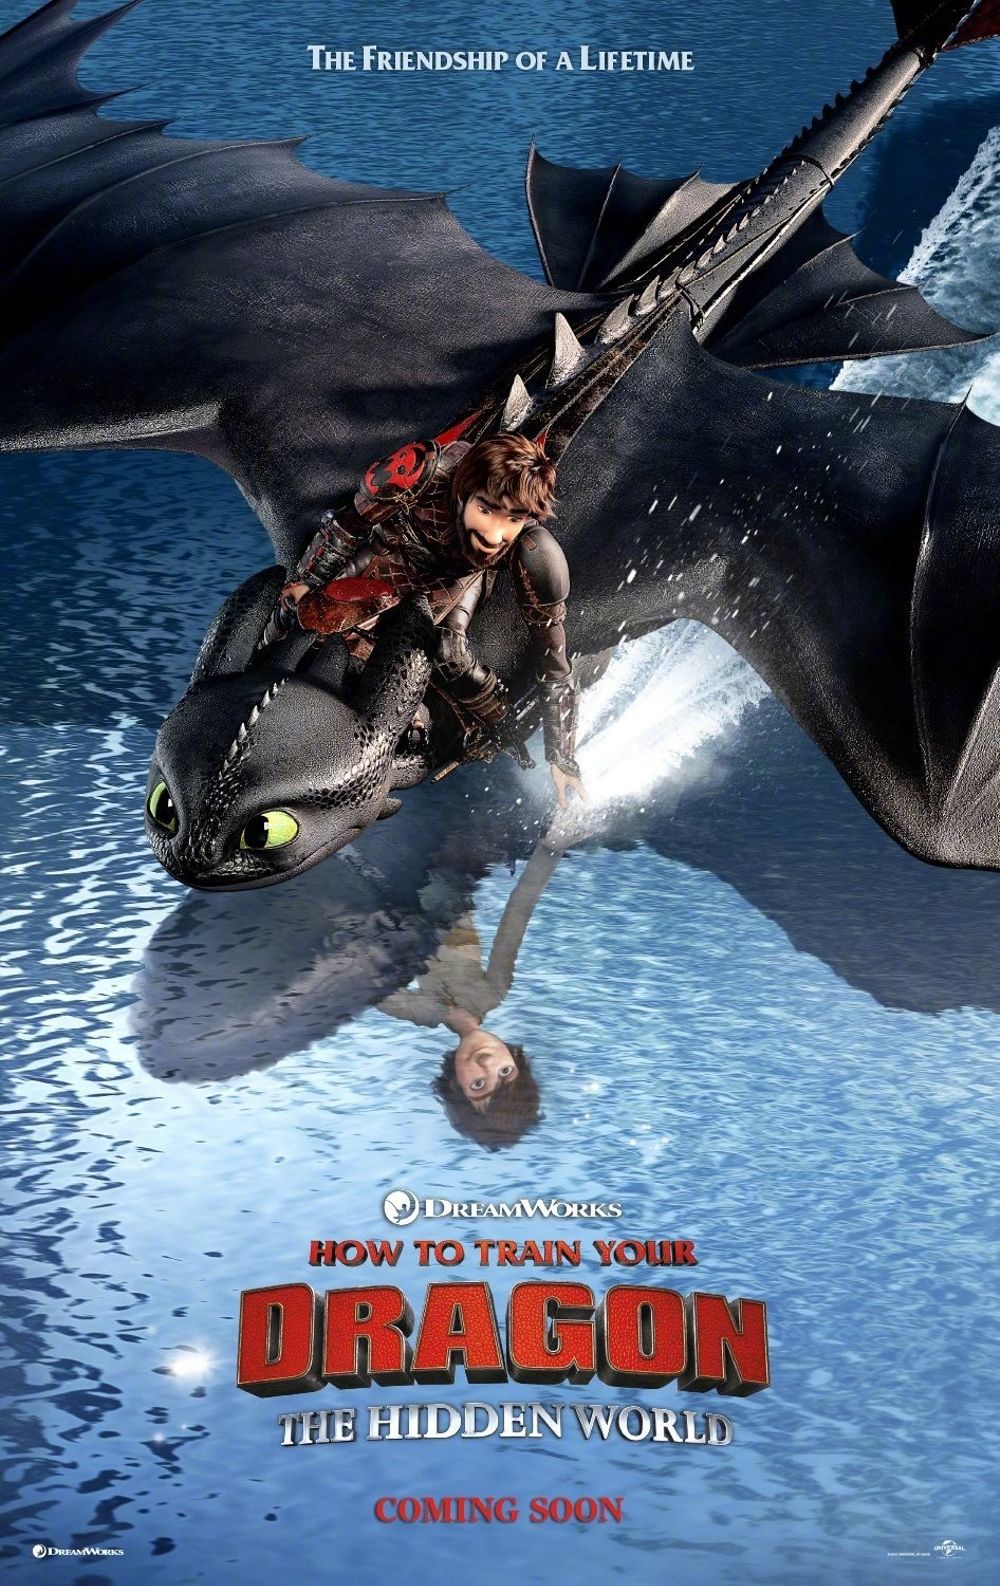 How To Train Your Dragon: The Hidden World Movie Review